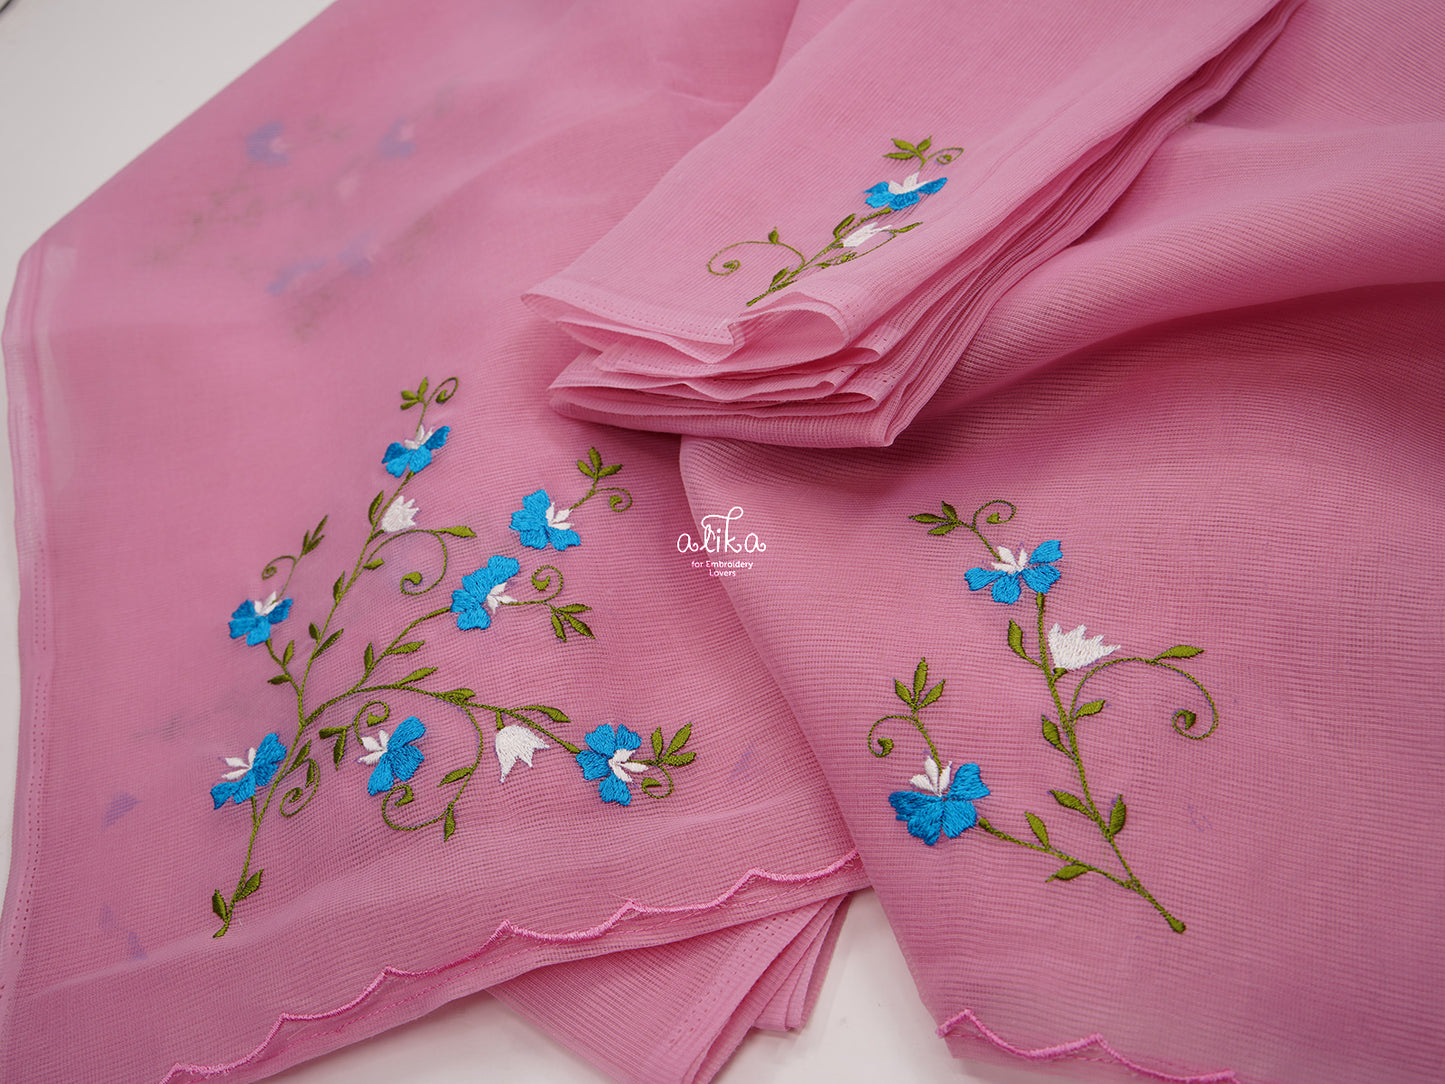 PINK KOTA SAREE WITH WHITE AND BLUE FLORAL MACHINE EMBROIDERY